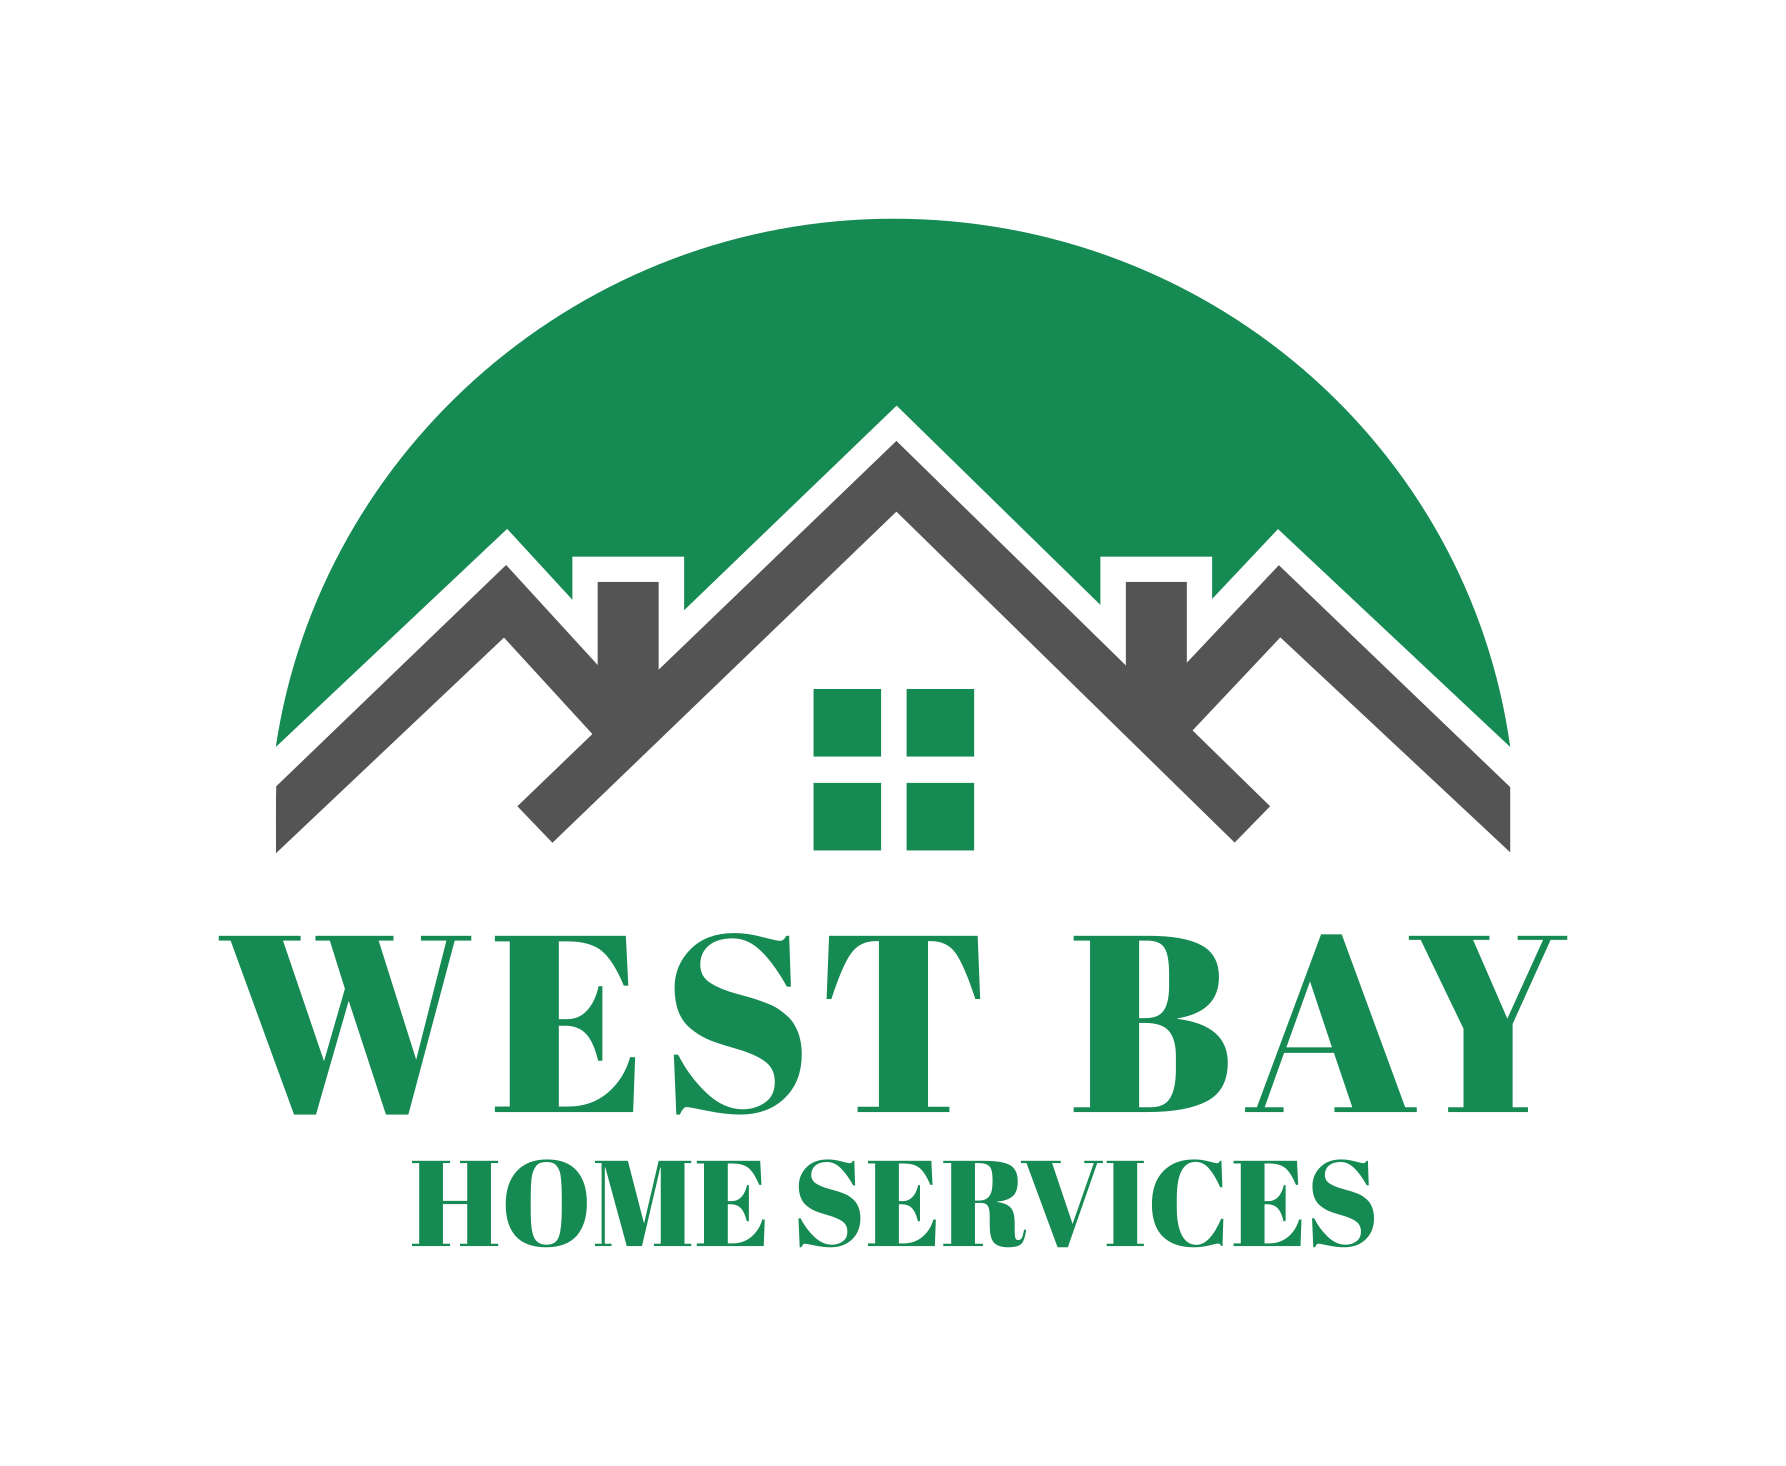 West Bay Home Services